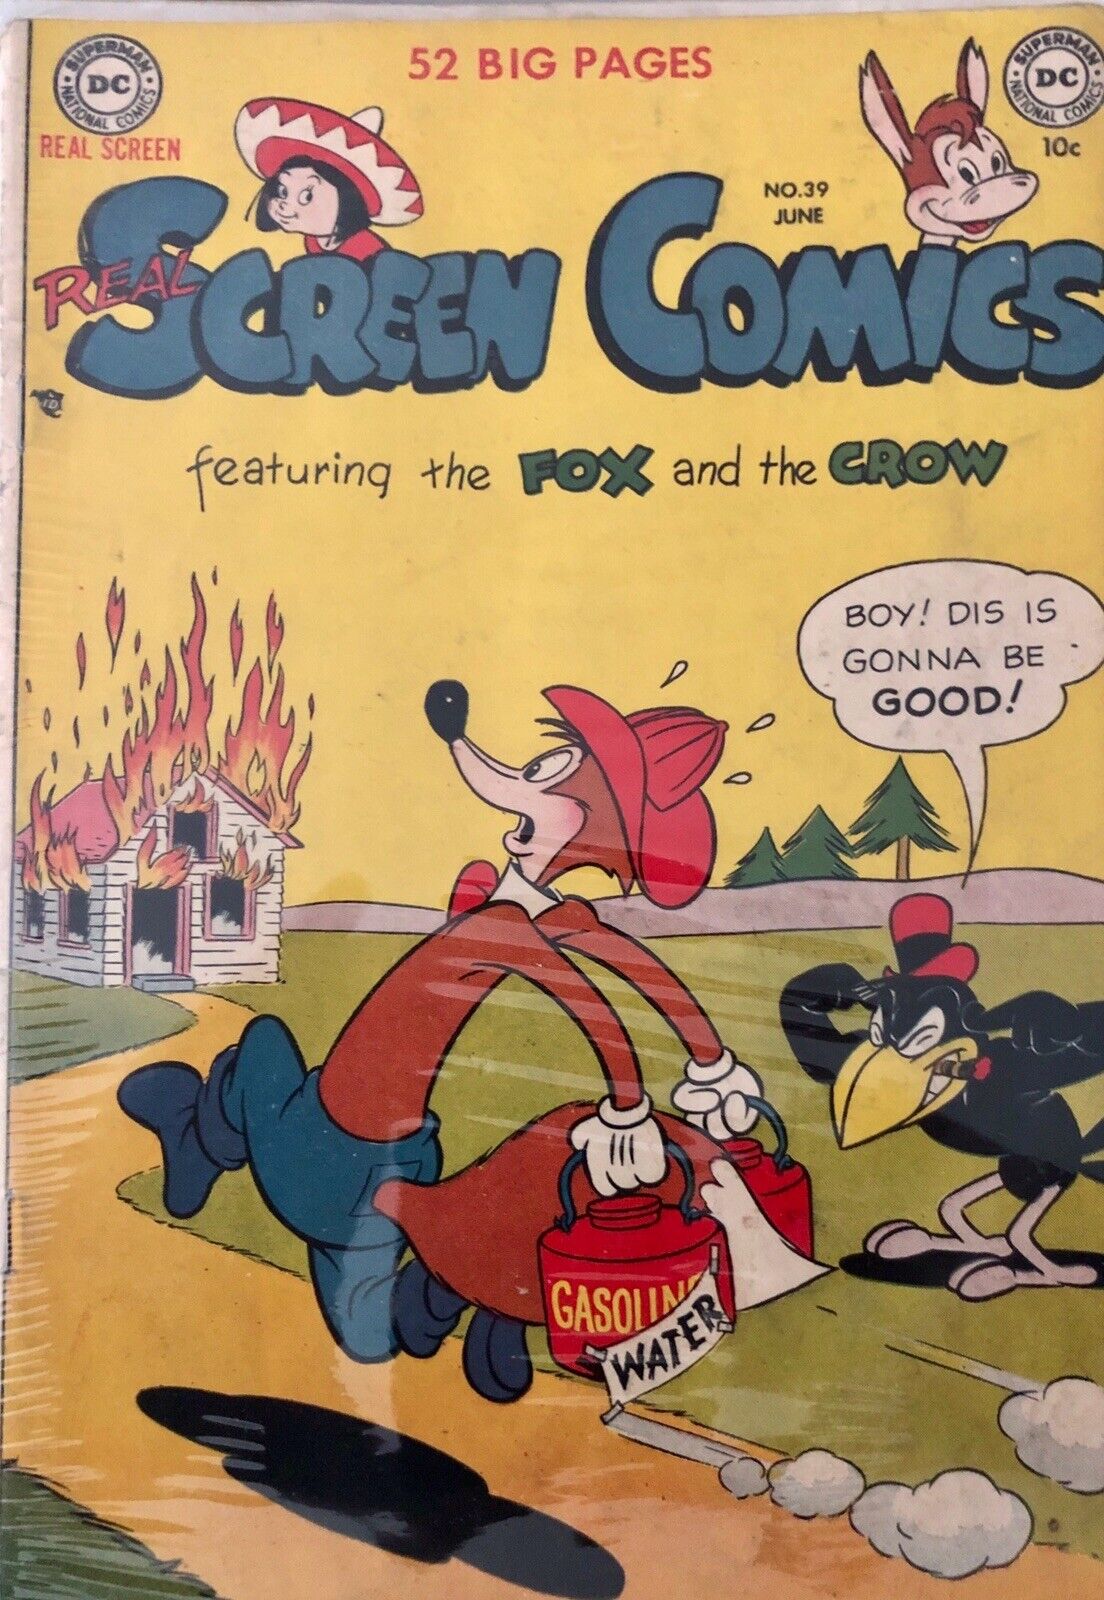 Real Screen Comics June #39 1951-DC-Firefighter Fox and the Crow.